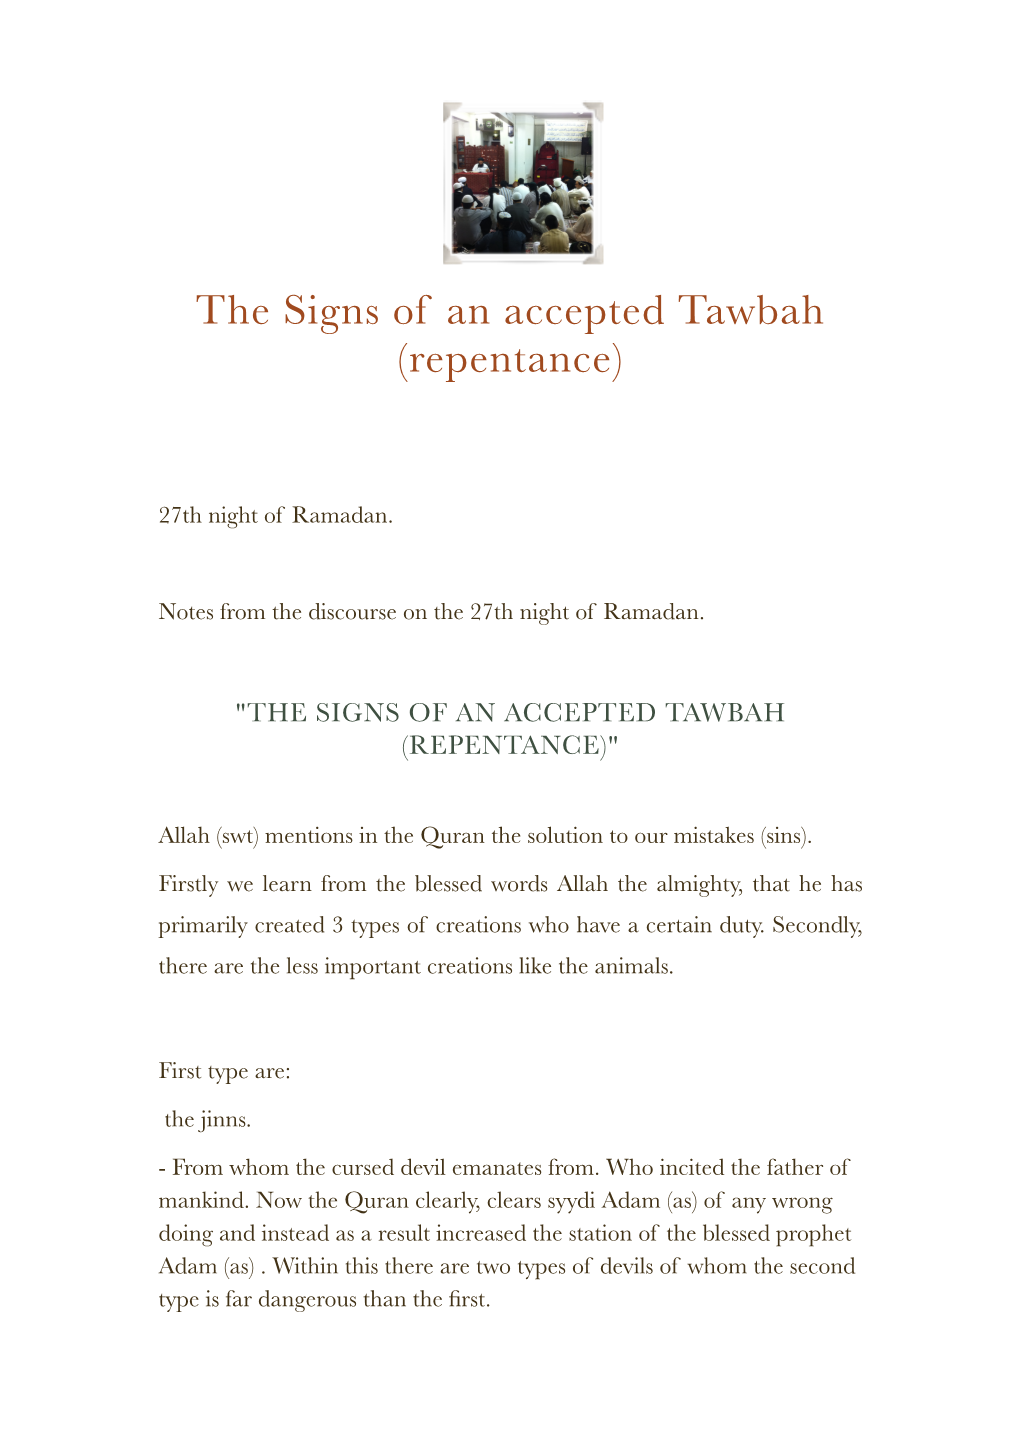 The Signs of an Accepted Tawbah (Repentance)